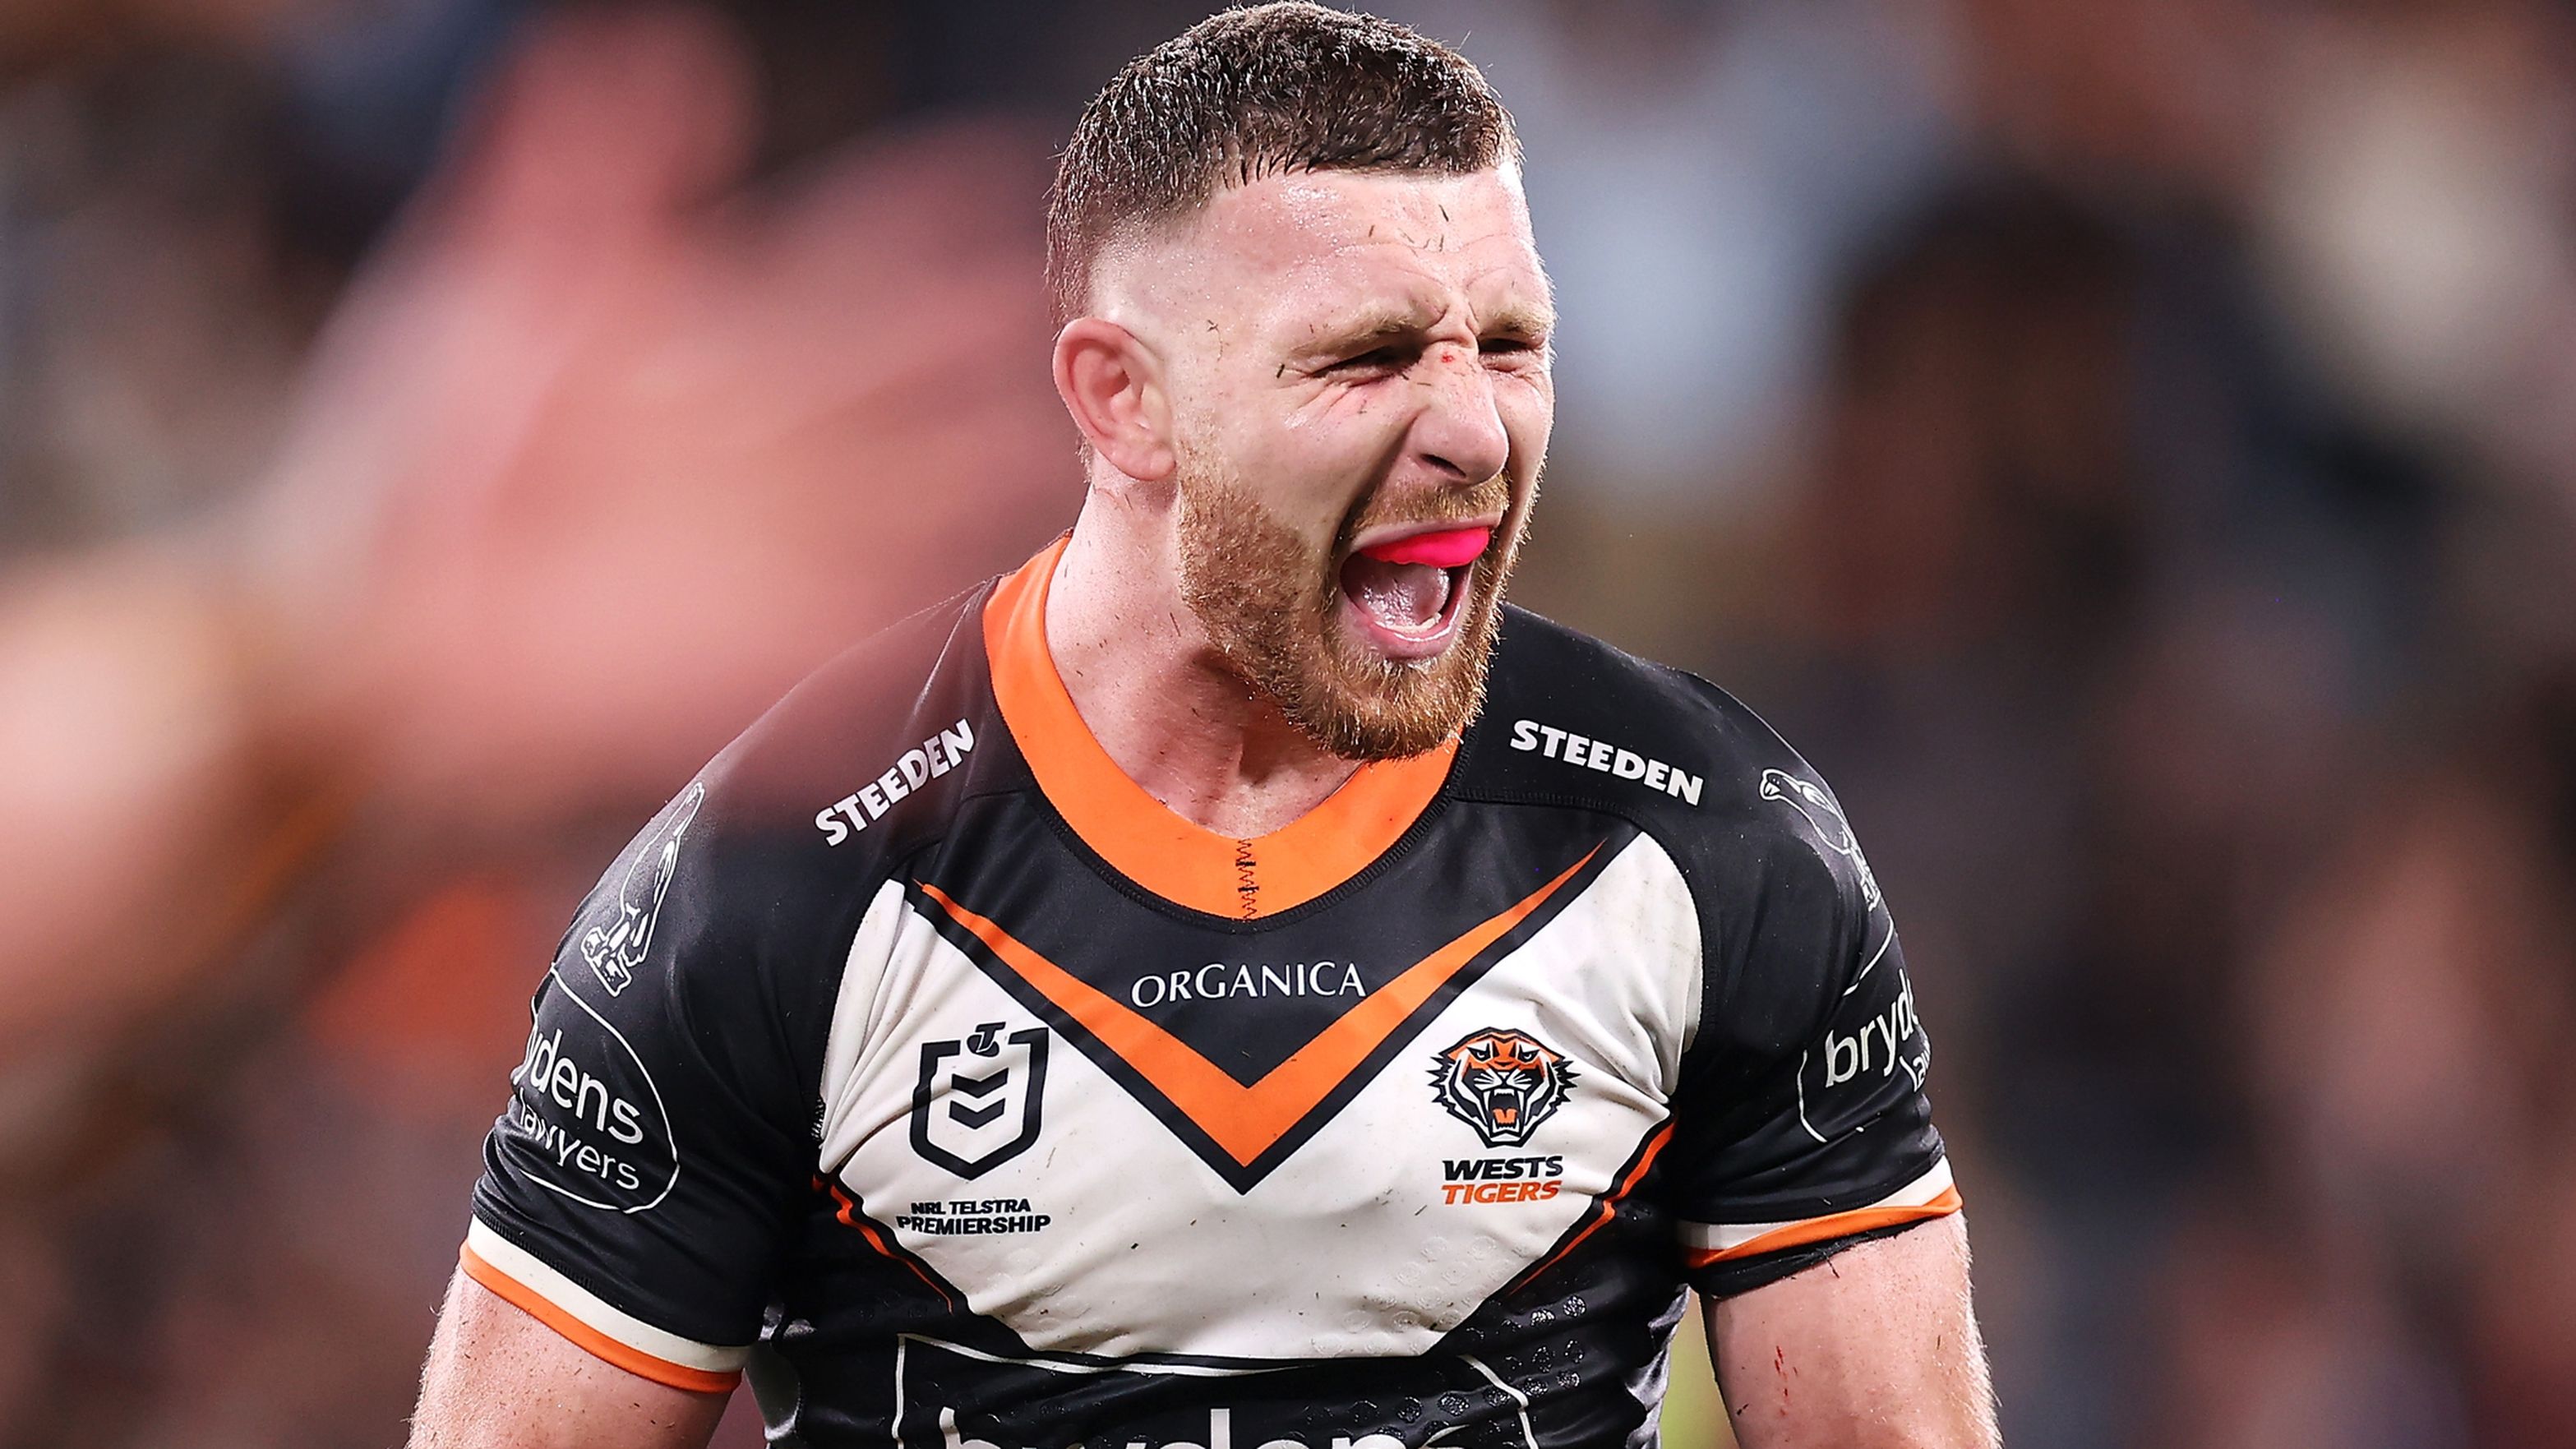 Wests Tigers recruit Jackson Hastings reveals the lessons learned after 2018 NRL exile